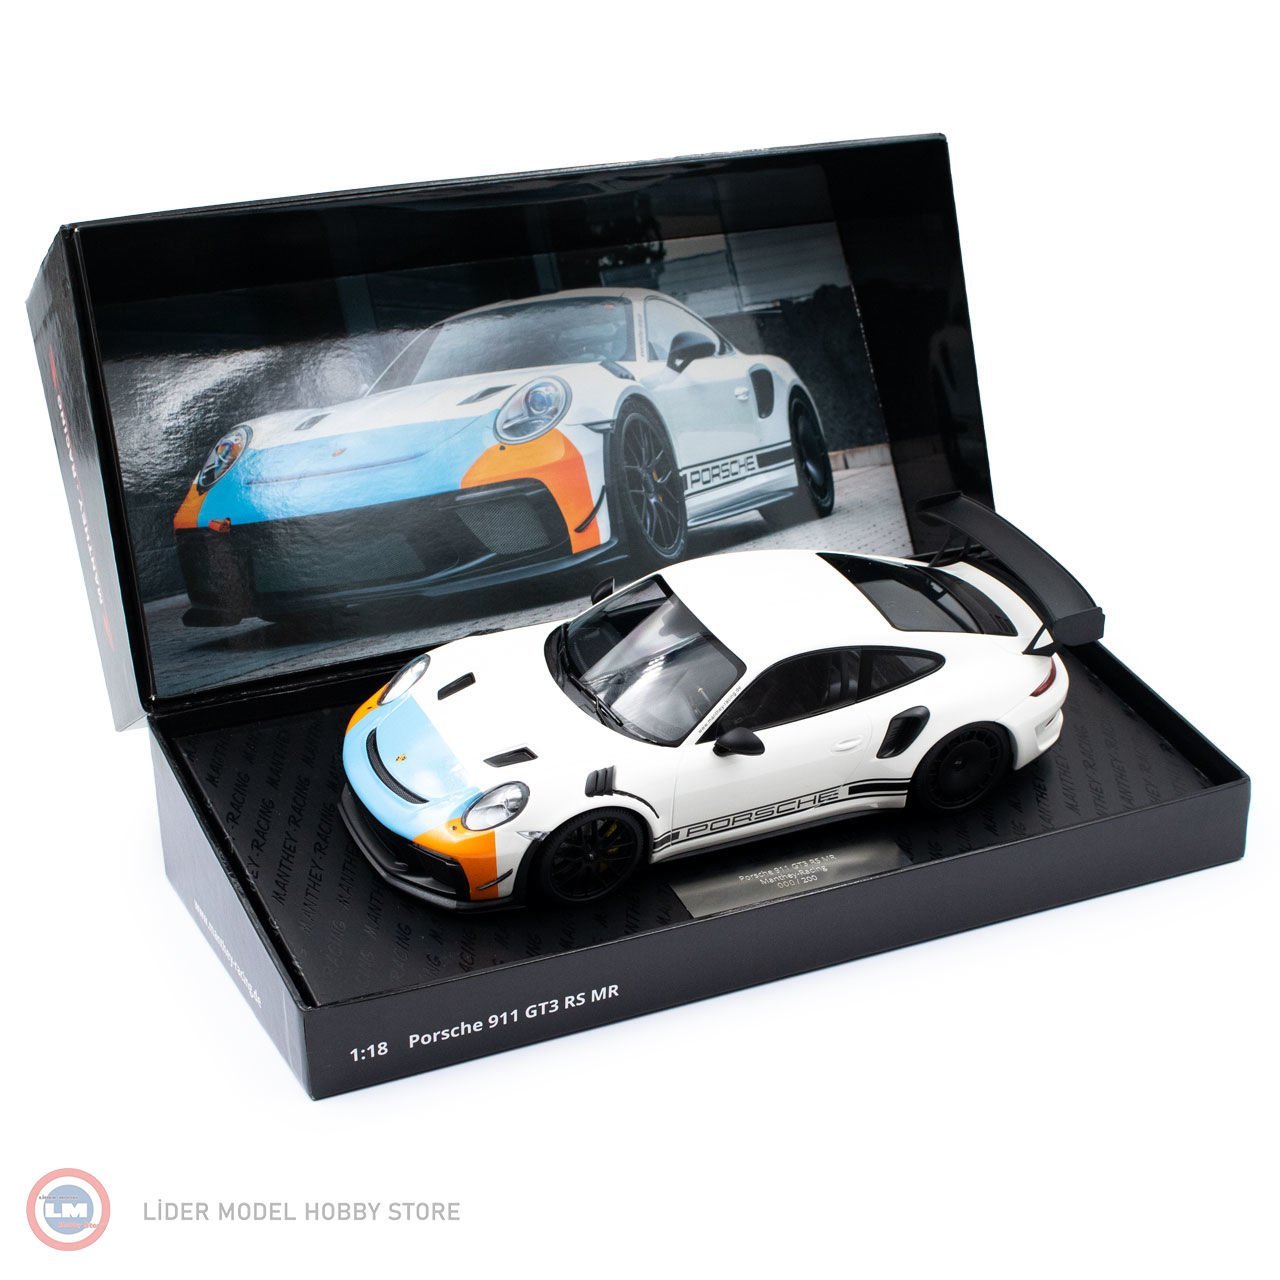 Minichamps - 1:18 2020 Porsche 911 GT3 RS MR - Manthey Collection- Collector Edition - 6.954,70 TL - 6.954,70 TL